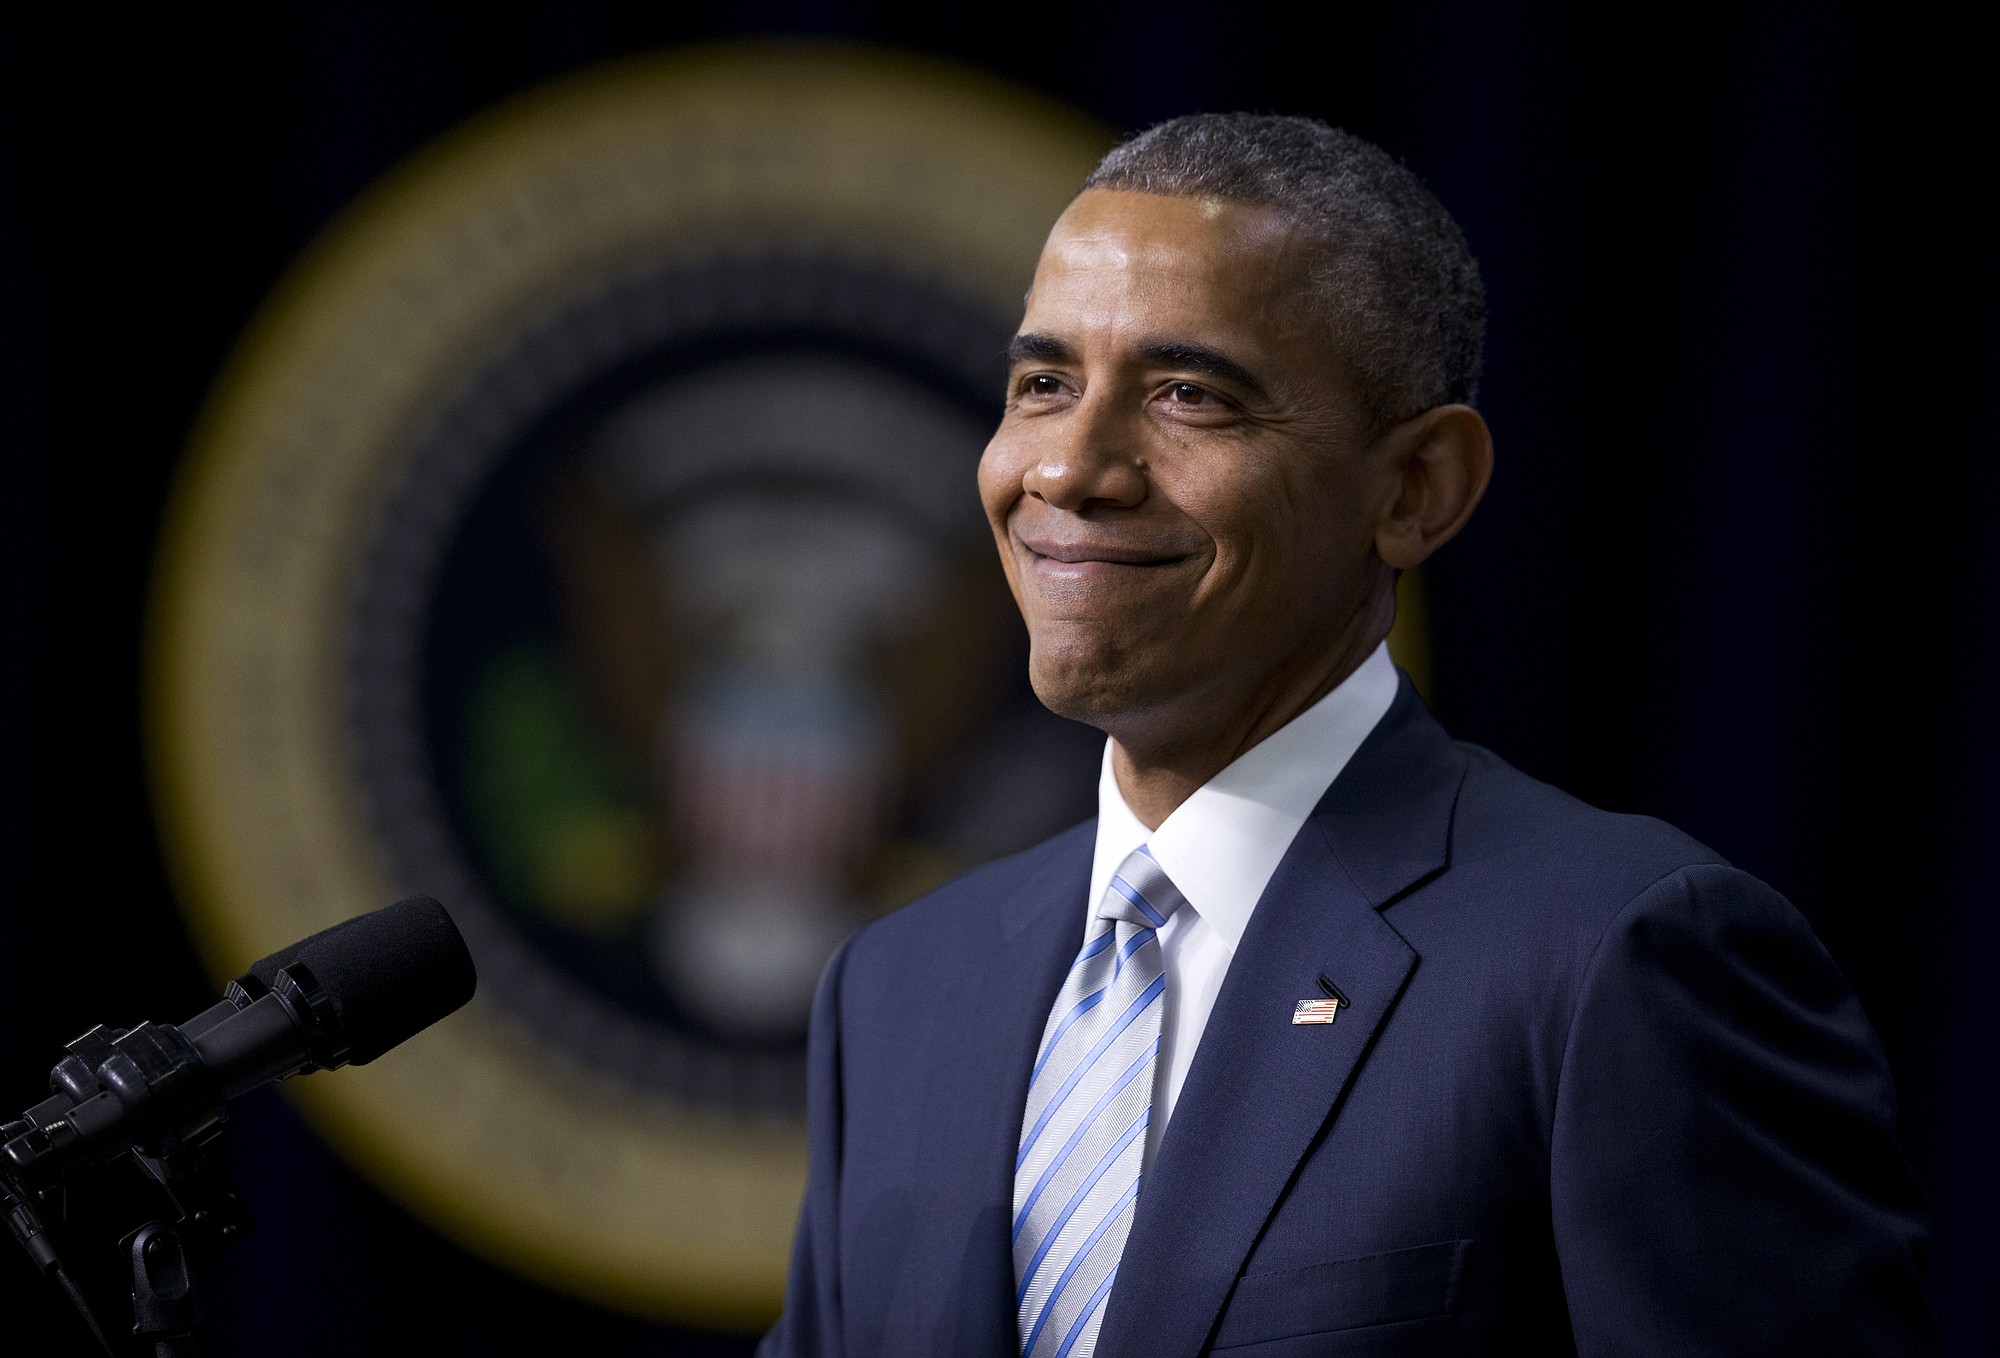 President Barack Obama smiles as he speaks on the fifth anniversary of his healthcare law Wednesday in the South Court Auditorium of the Eisenhower Executive Office Building on the White House complex in Washington.